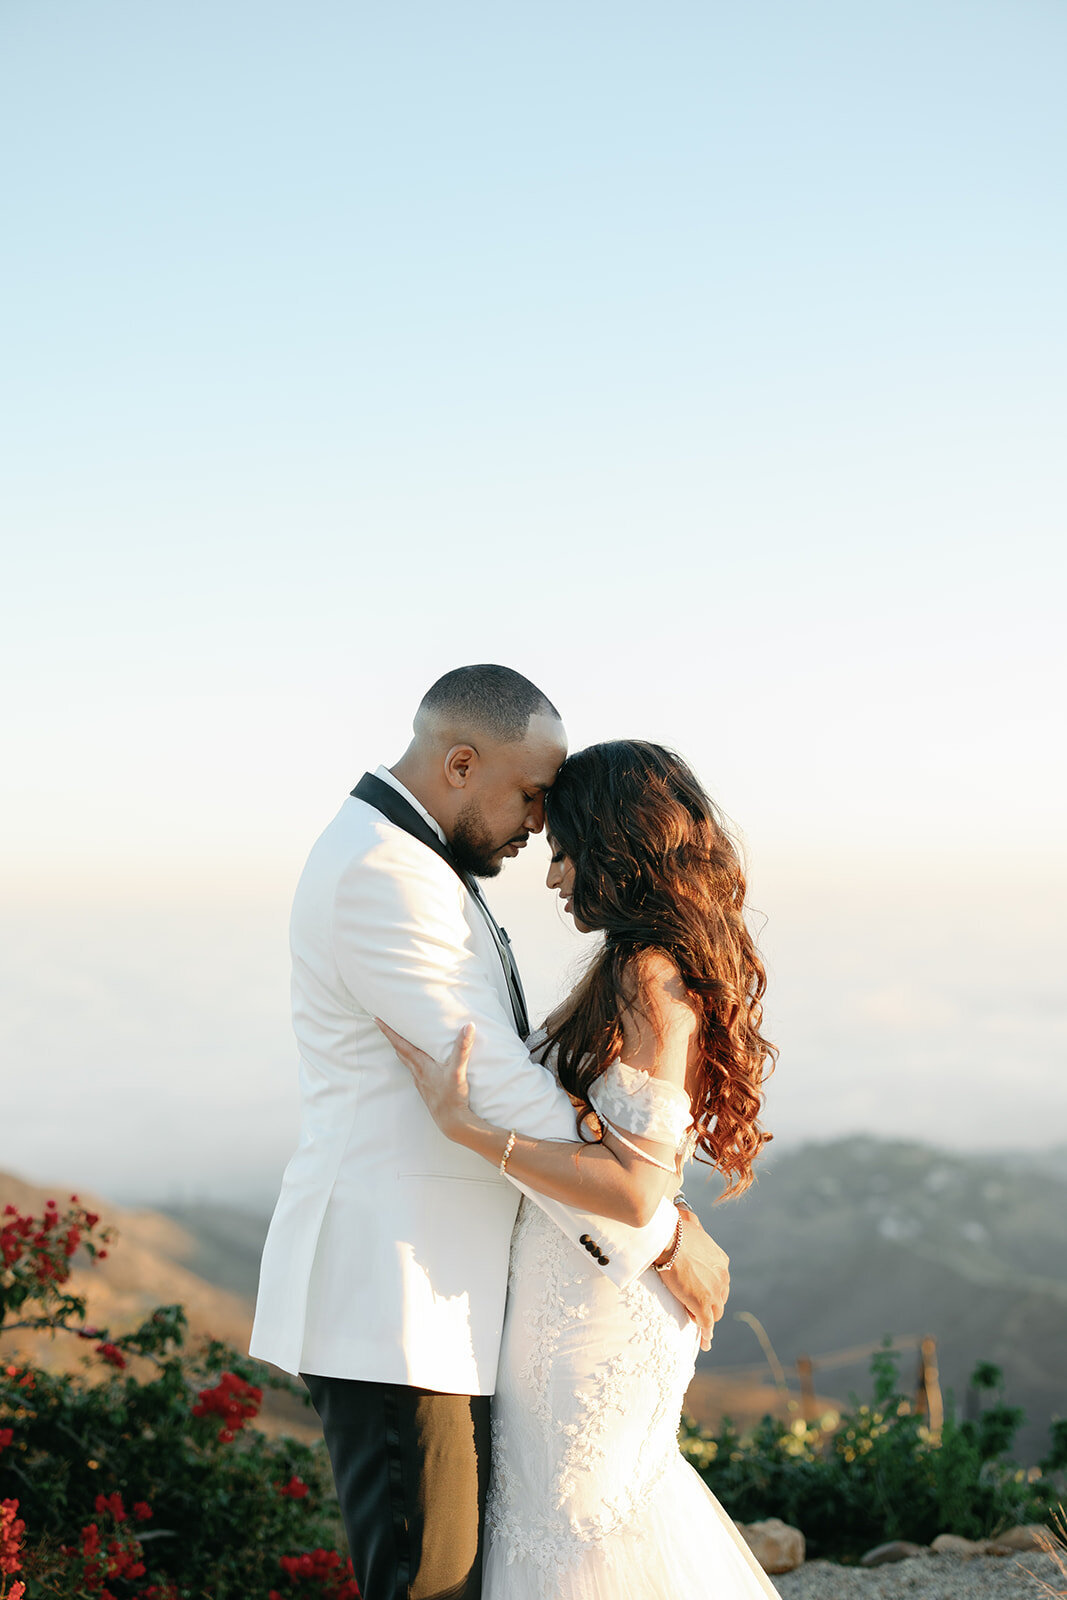 safia + ryan - The Authentic Storytellers-118